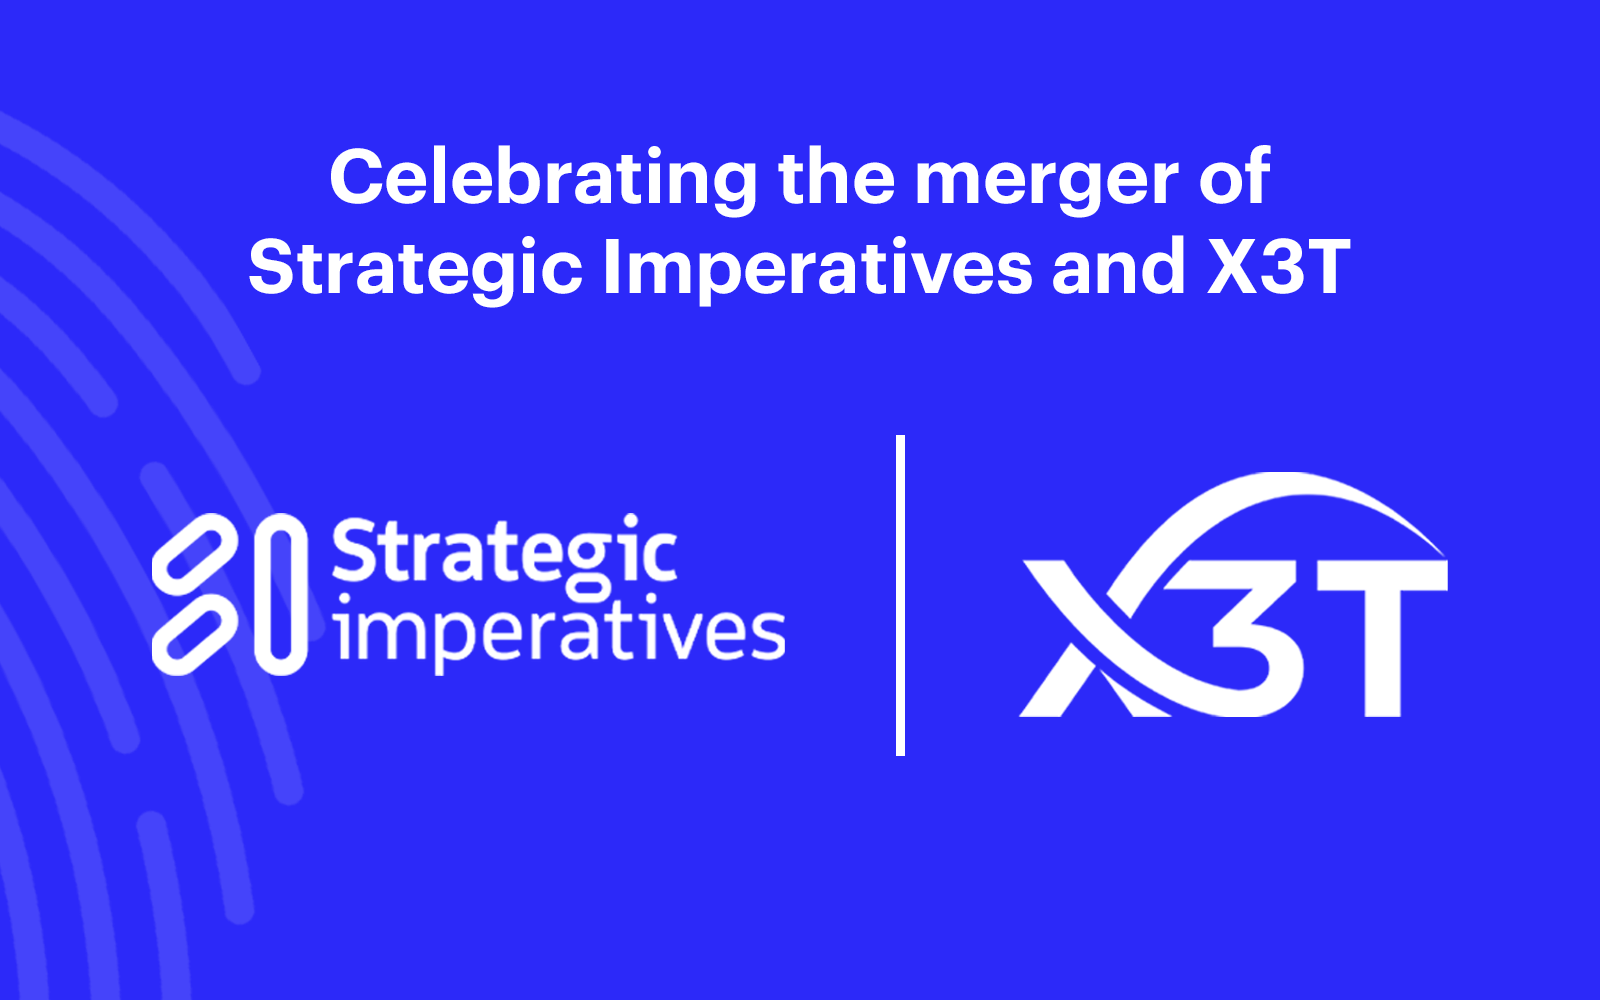 Strategic Imperatives and X3T announce merger to accelerate connections between AltNets and ISPs